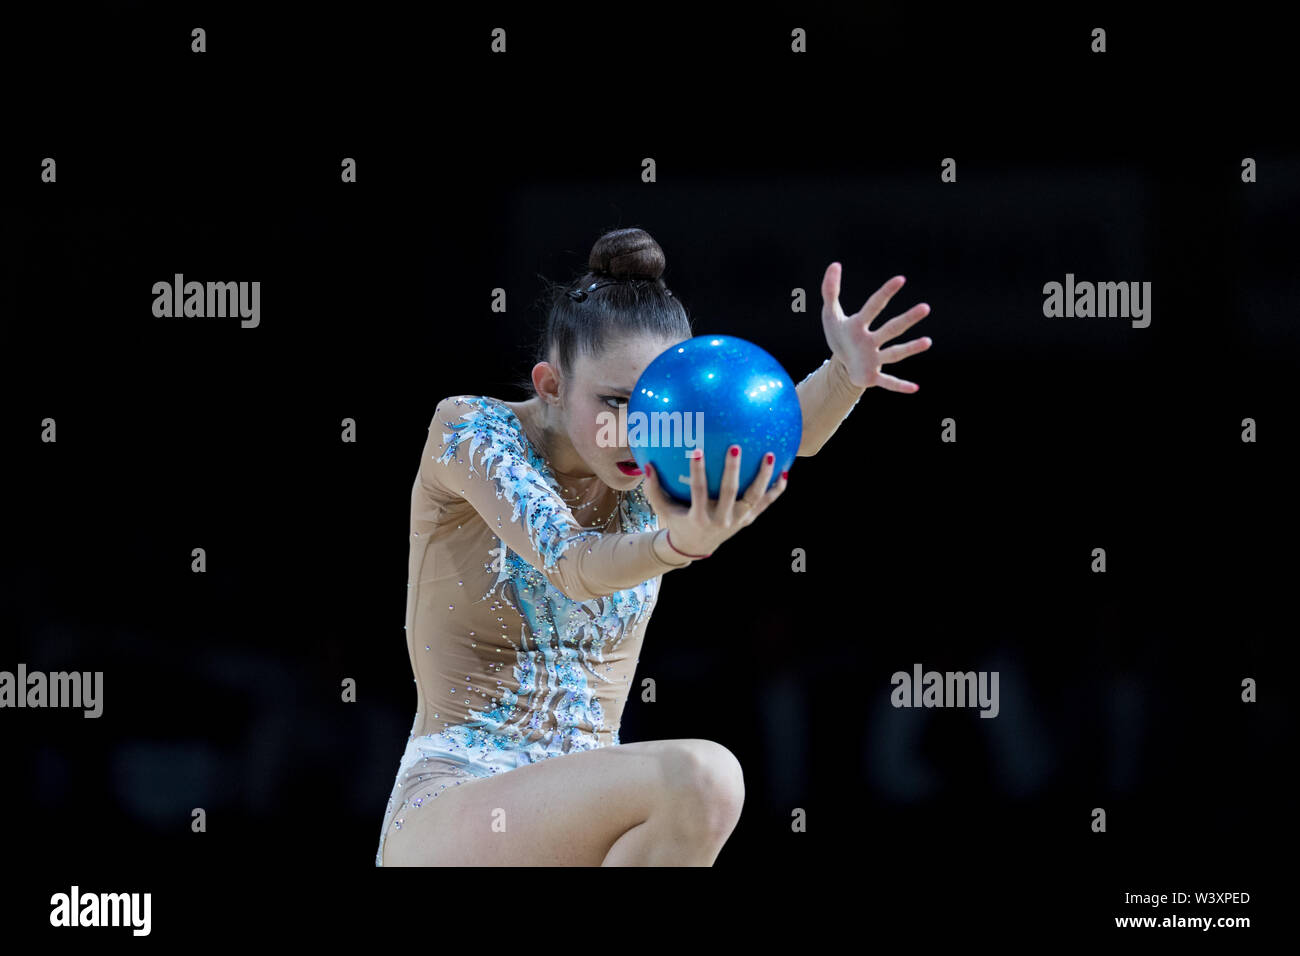 Maena Millon from France performs her ball routine during 2019 Grand Prix de Thiais Stock Photo